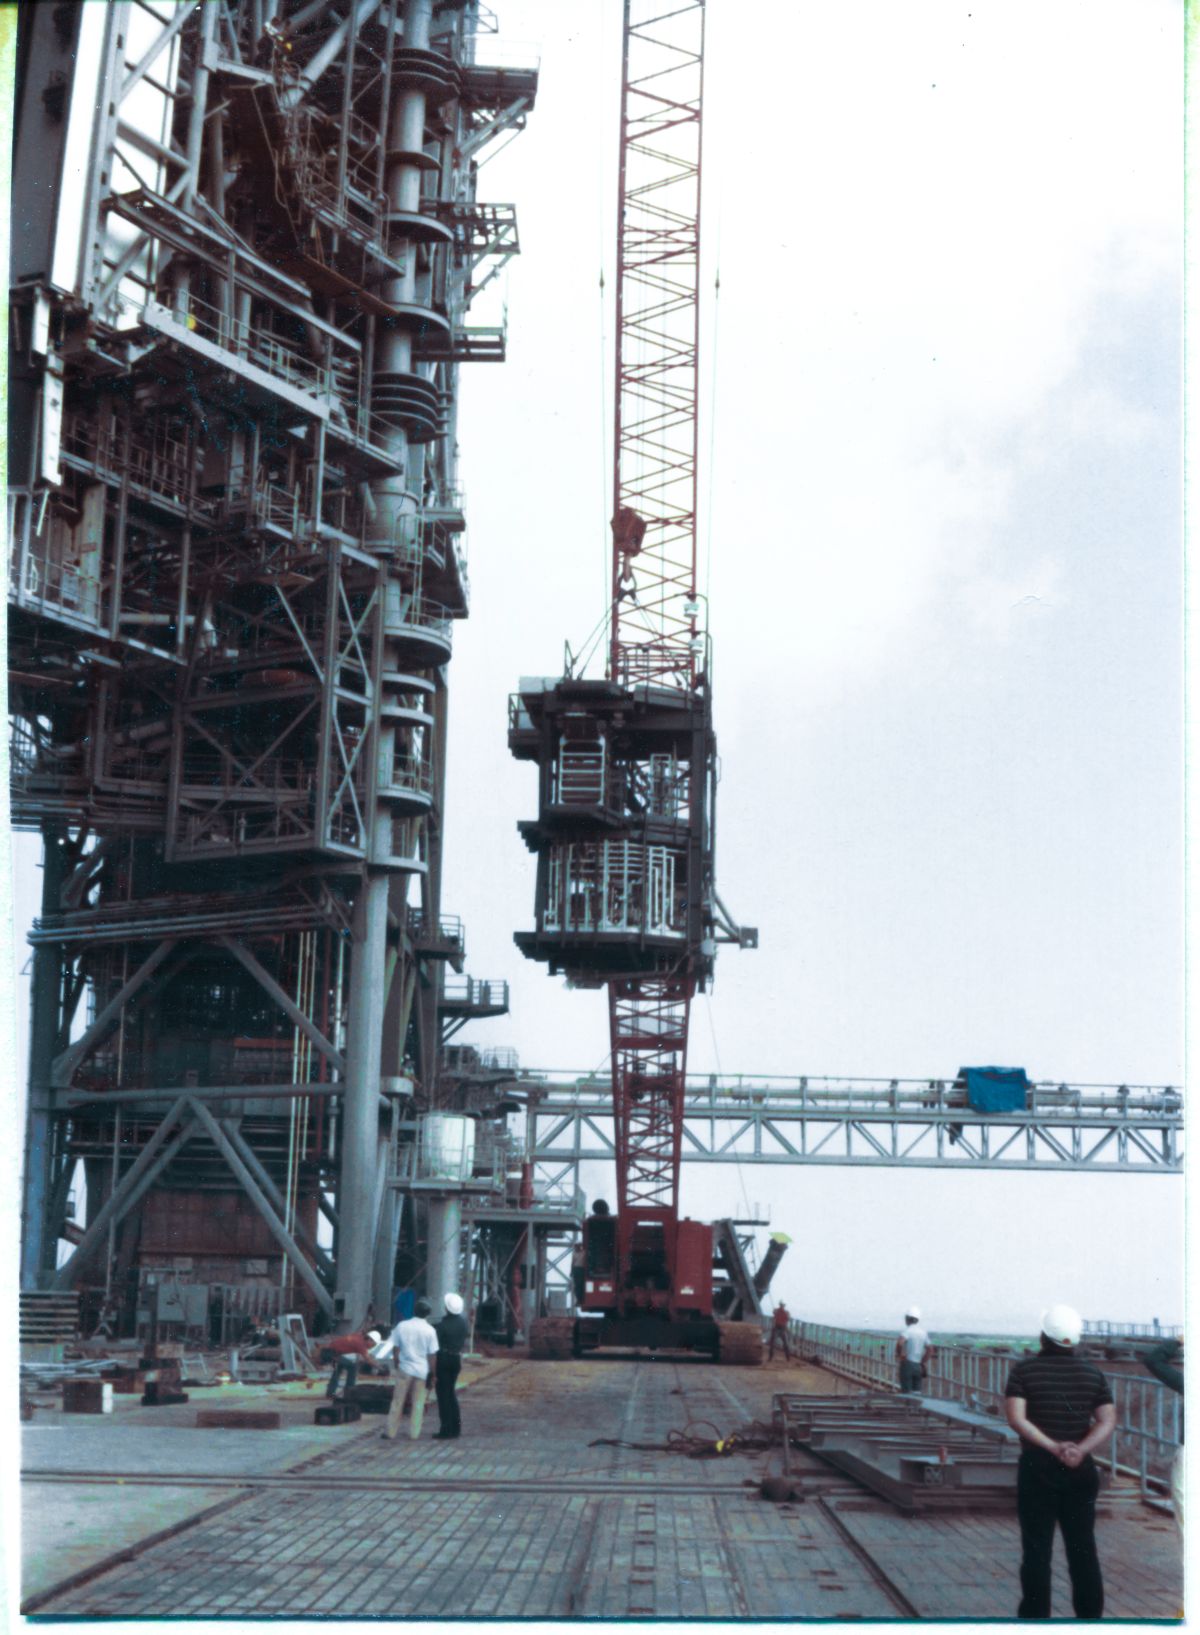 Image 090. Having properly secured and verified that all is well with the suspended Orbiter Mid-Body Umbilical Unit, the crane operator has boomed left, just a little, and now has the OMBUU located out a little farther away from the face of the RSS, above the Crawlerway on the Pad Deck at Space Shuttle Launch Complex 39-B, Kennedy Space Center, Florida. He is now using only his load line to lift the hook which carries it aloft. A pair of Union Ironworkers continue to control the orientation of the OMBUU via the tag lines they will keep working for the duration of the lift, until the OMBUU reaches its destination. Up on the RSS, top left of frame, one of the connection plates which the bottom level of the OMBUU will bolt to, at RSS Column Line C-3 has come into view. To its right, the Access Catwalk at elevation 163'-9” has also come into view, and you can see ironworkers standing on it, ready to connect the OMBUU when it arrives. Beneath that catwalk, scaffolding is in place to give the pipefitters access to the run of plumbing which is supported beneath the catwalk, through which cryo and high-pressure gas will be fed into it from elevation 160'-0” on the FSS. Getting the OMBUU hung on the tower is only the beginning. A tremendous amount of work follows, getting it configured for its role supplying the Space Shuttle with consumables through the Mid-body Umbilical on the left side of the Orbiter's fuselage prior to lift-off. Photo by James MacLaren.